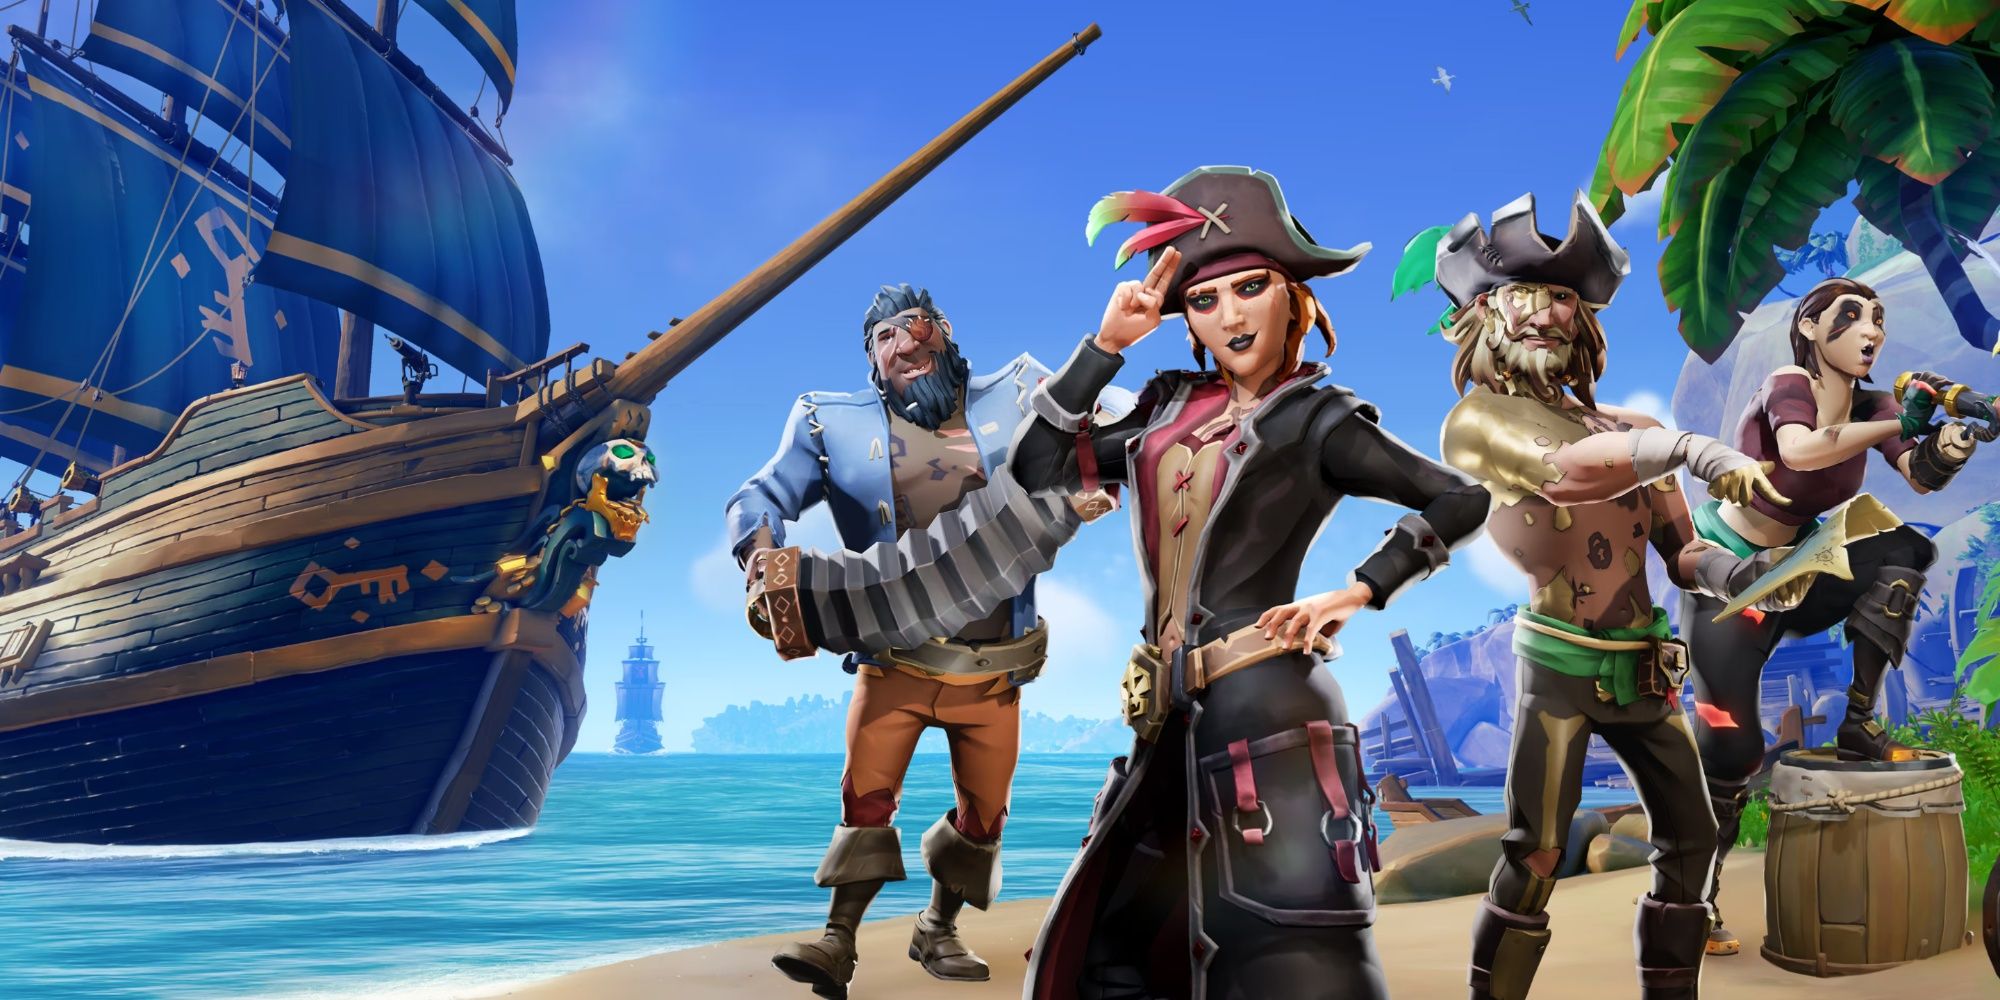 sea of thieves characters on an island